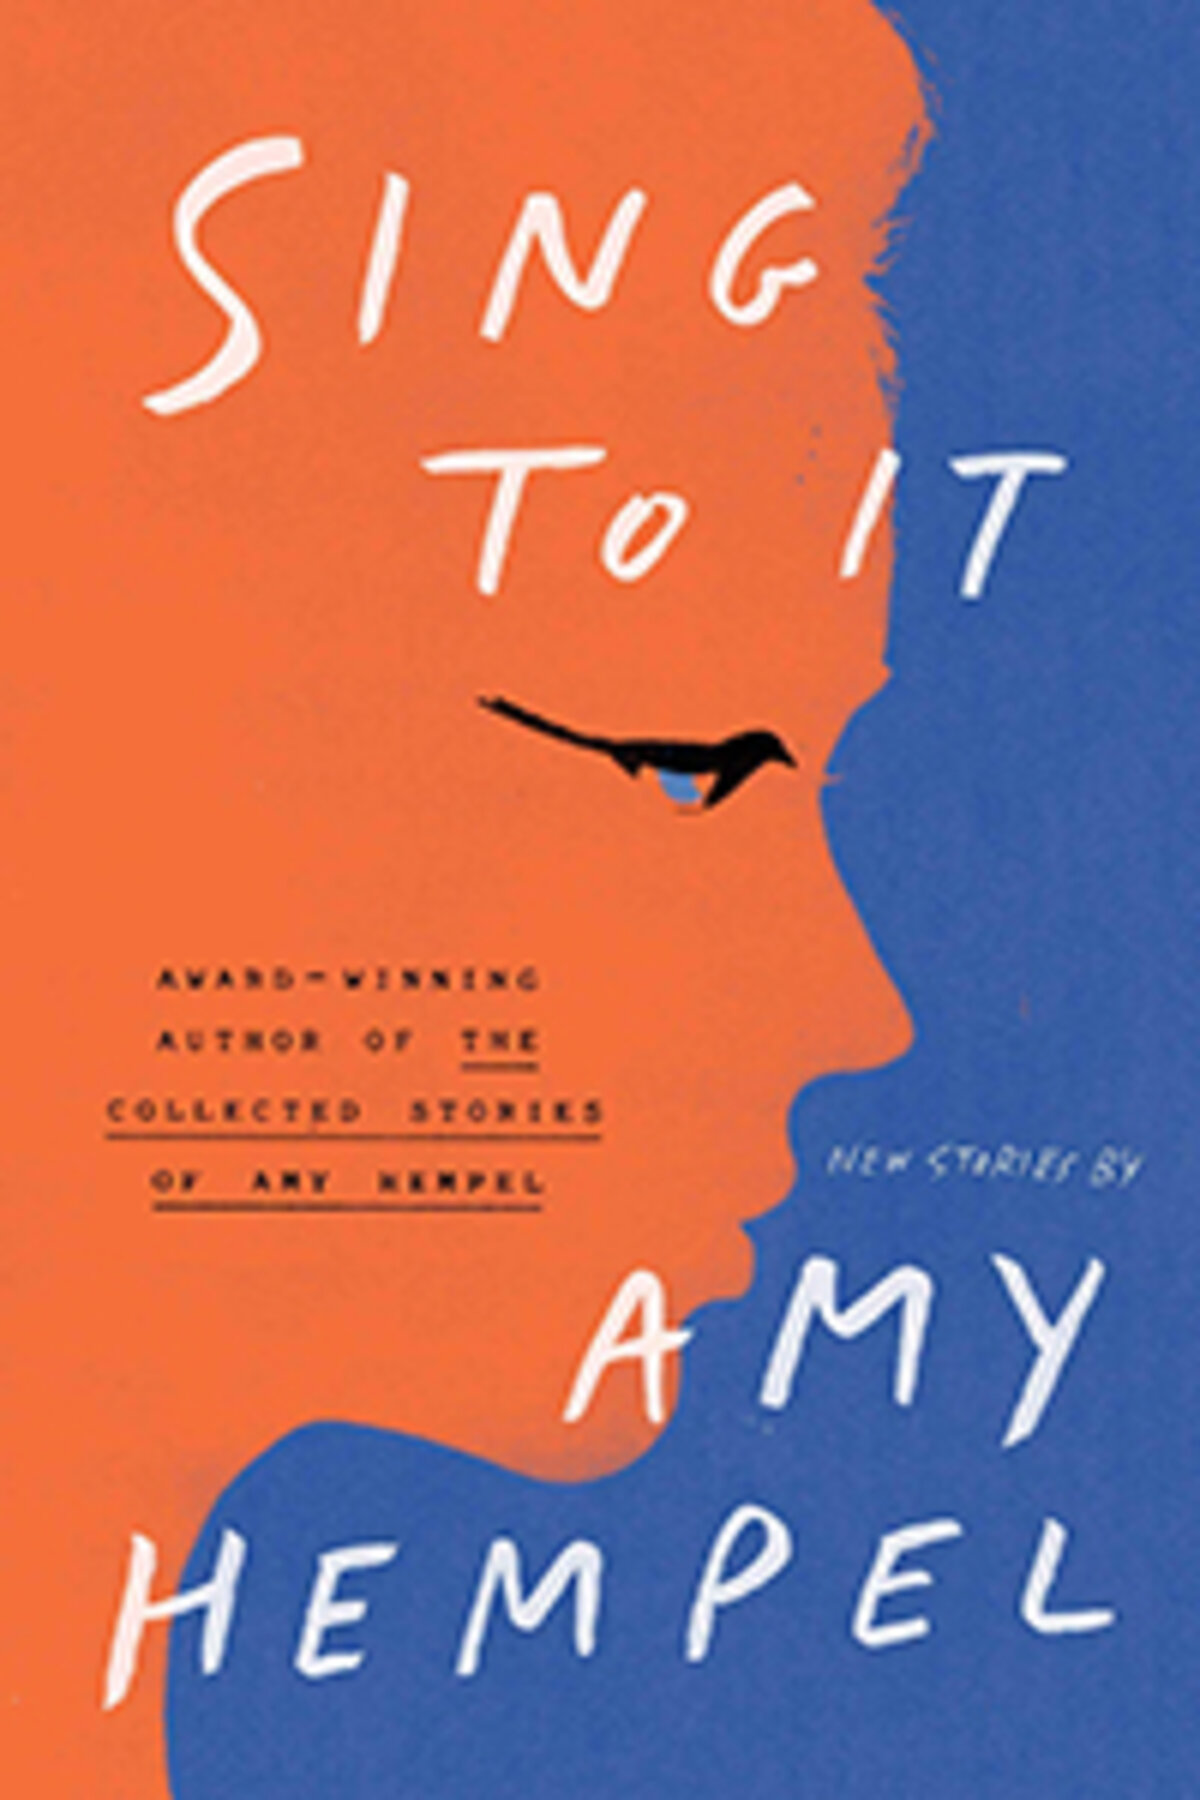 Profile of individual on book cover for Sing to It by Amy Hempel